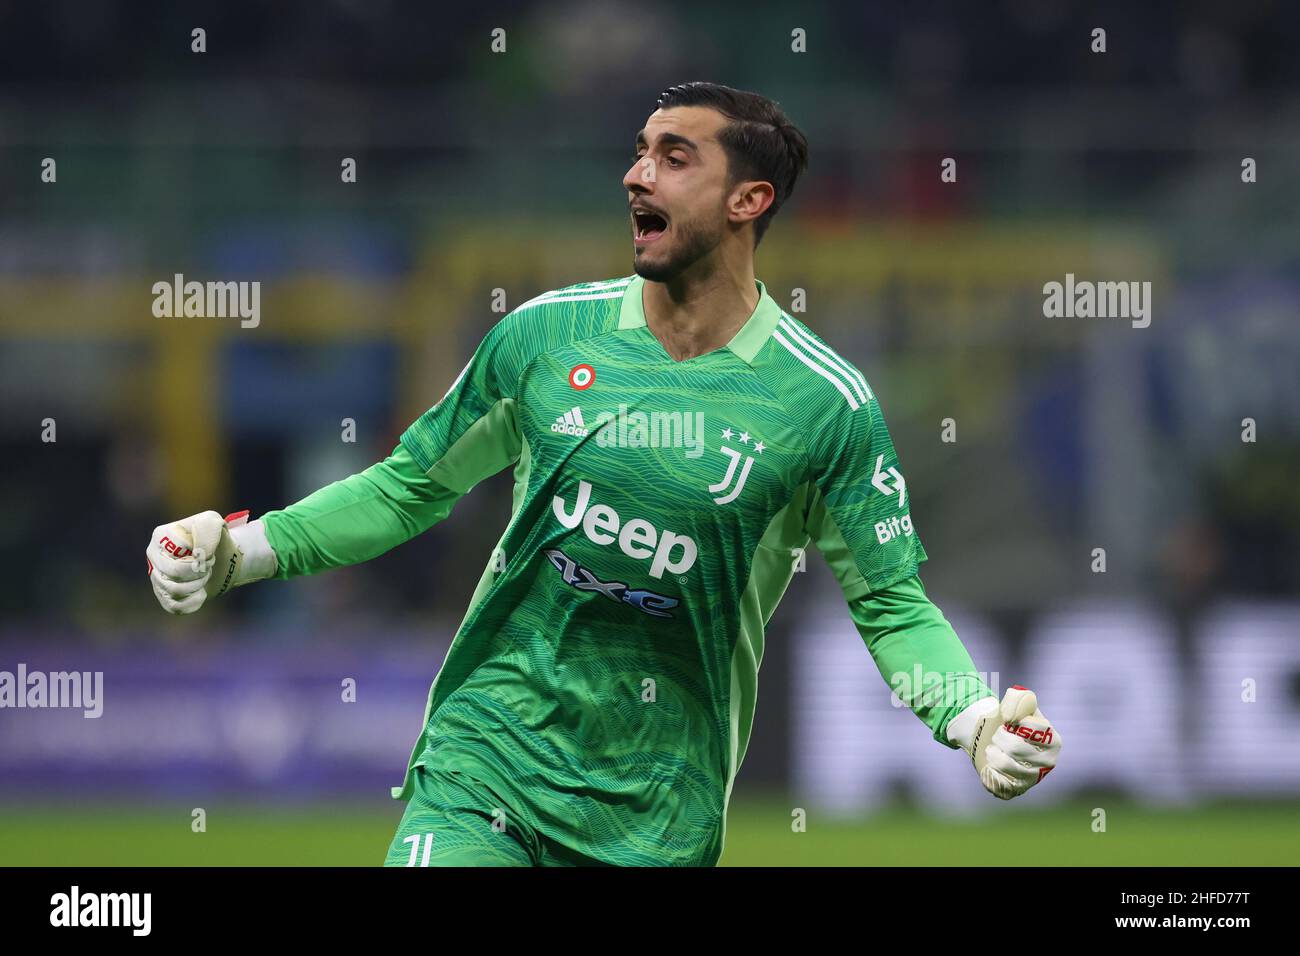 Milan, Italy, 12th January 2022. Mattia Perin of Juventus celebrates after  team mate Weston McKennie scored to give the side a 1-0 lead during the  Supercoppa Frecciarossa match at Giuseppe Meazza, Milan.